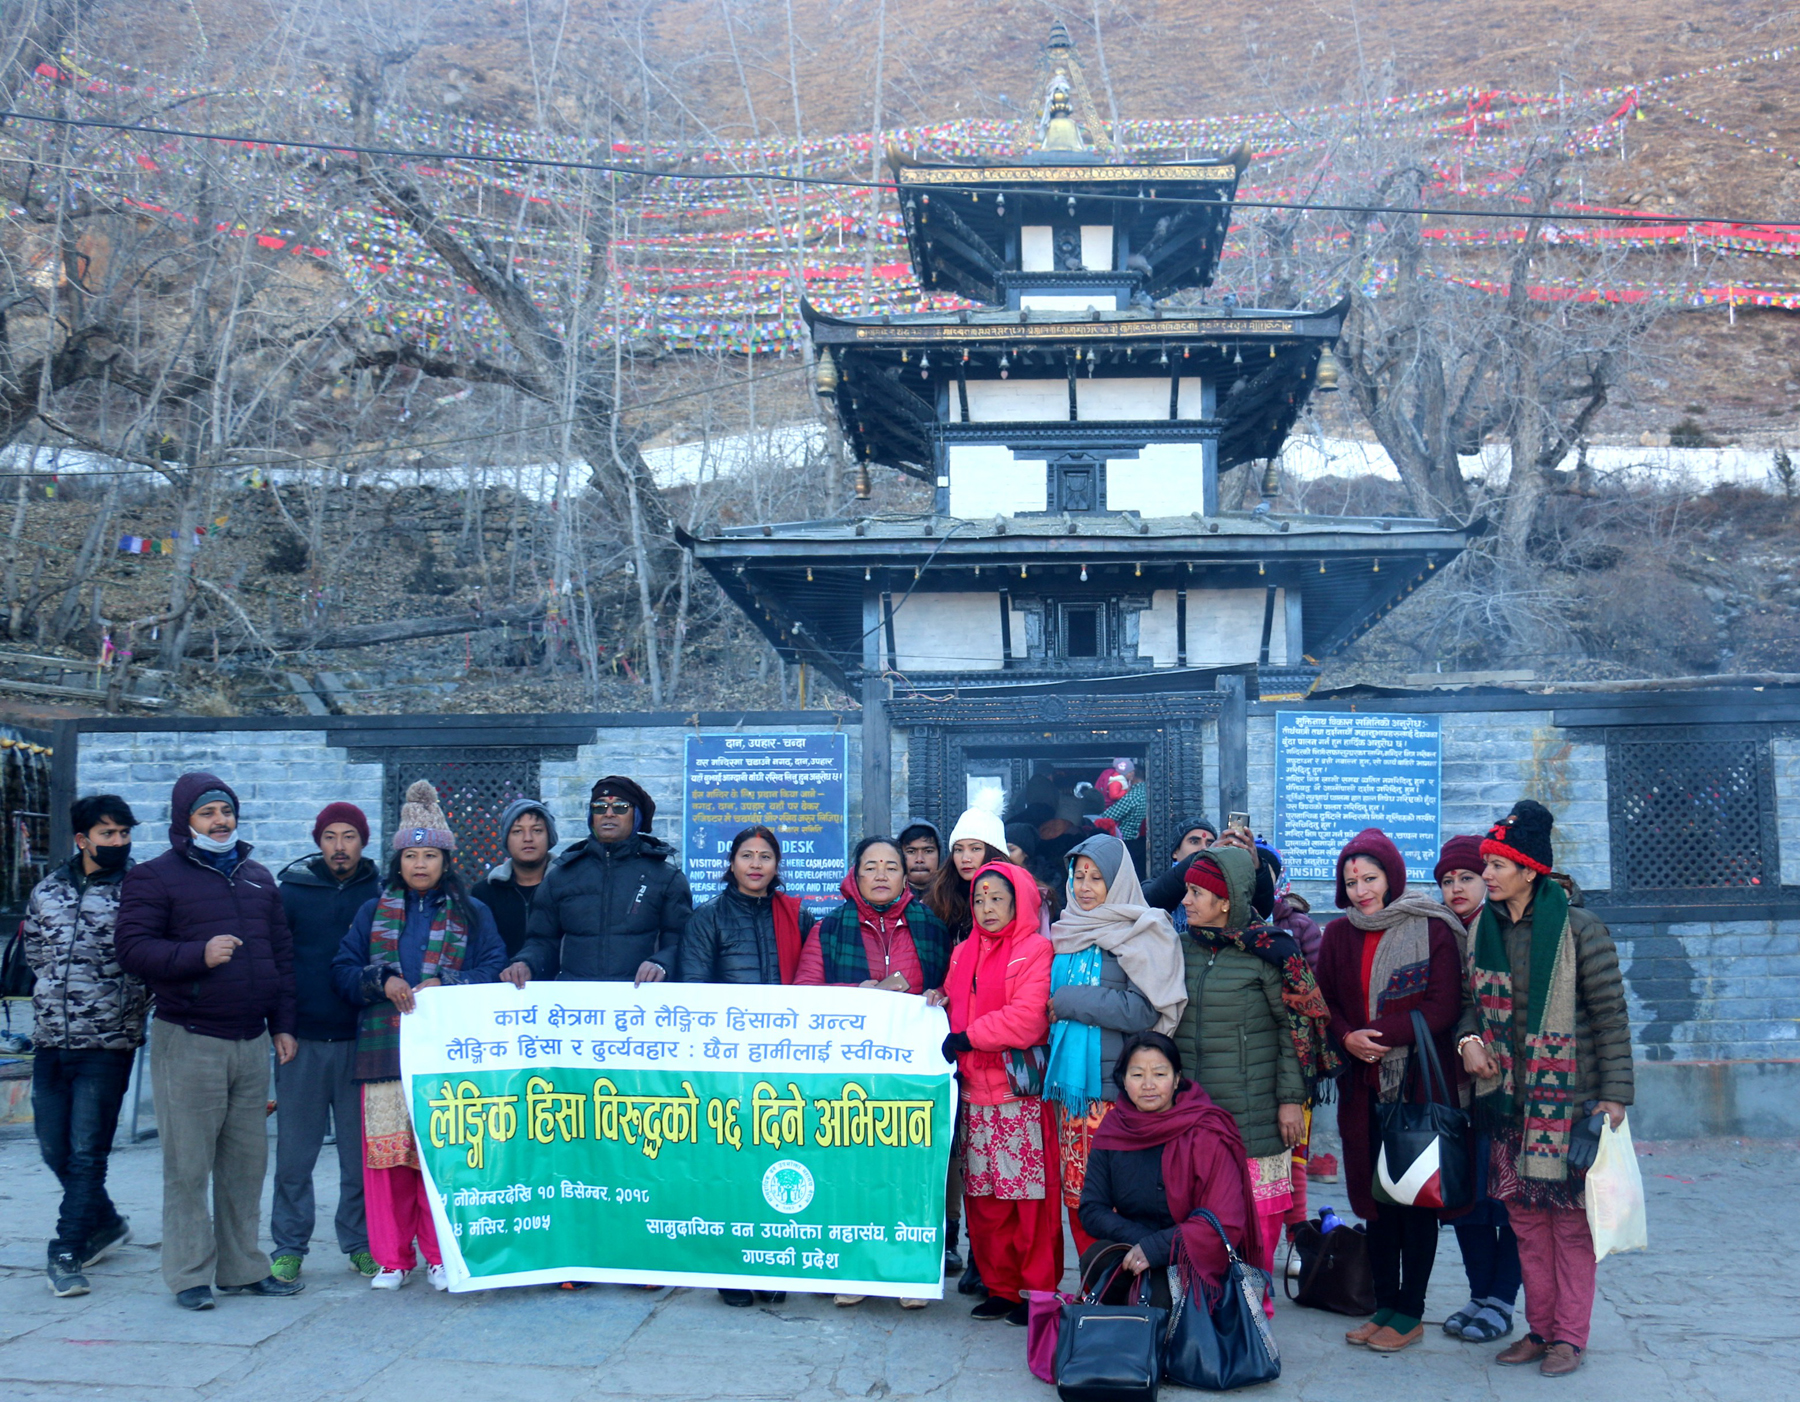 Campaign against GBV kicks off from Muktinath Temple